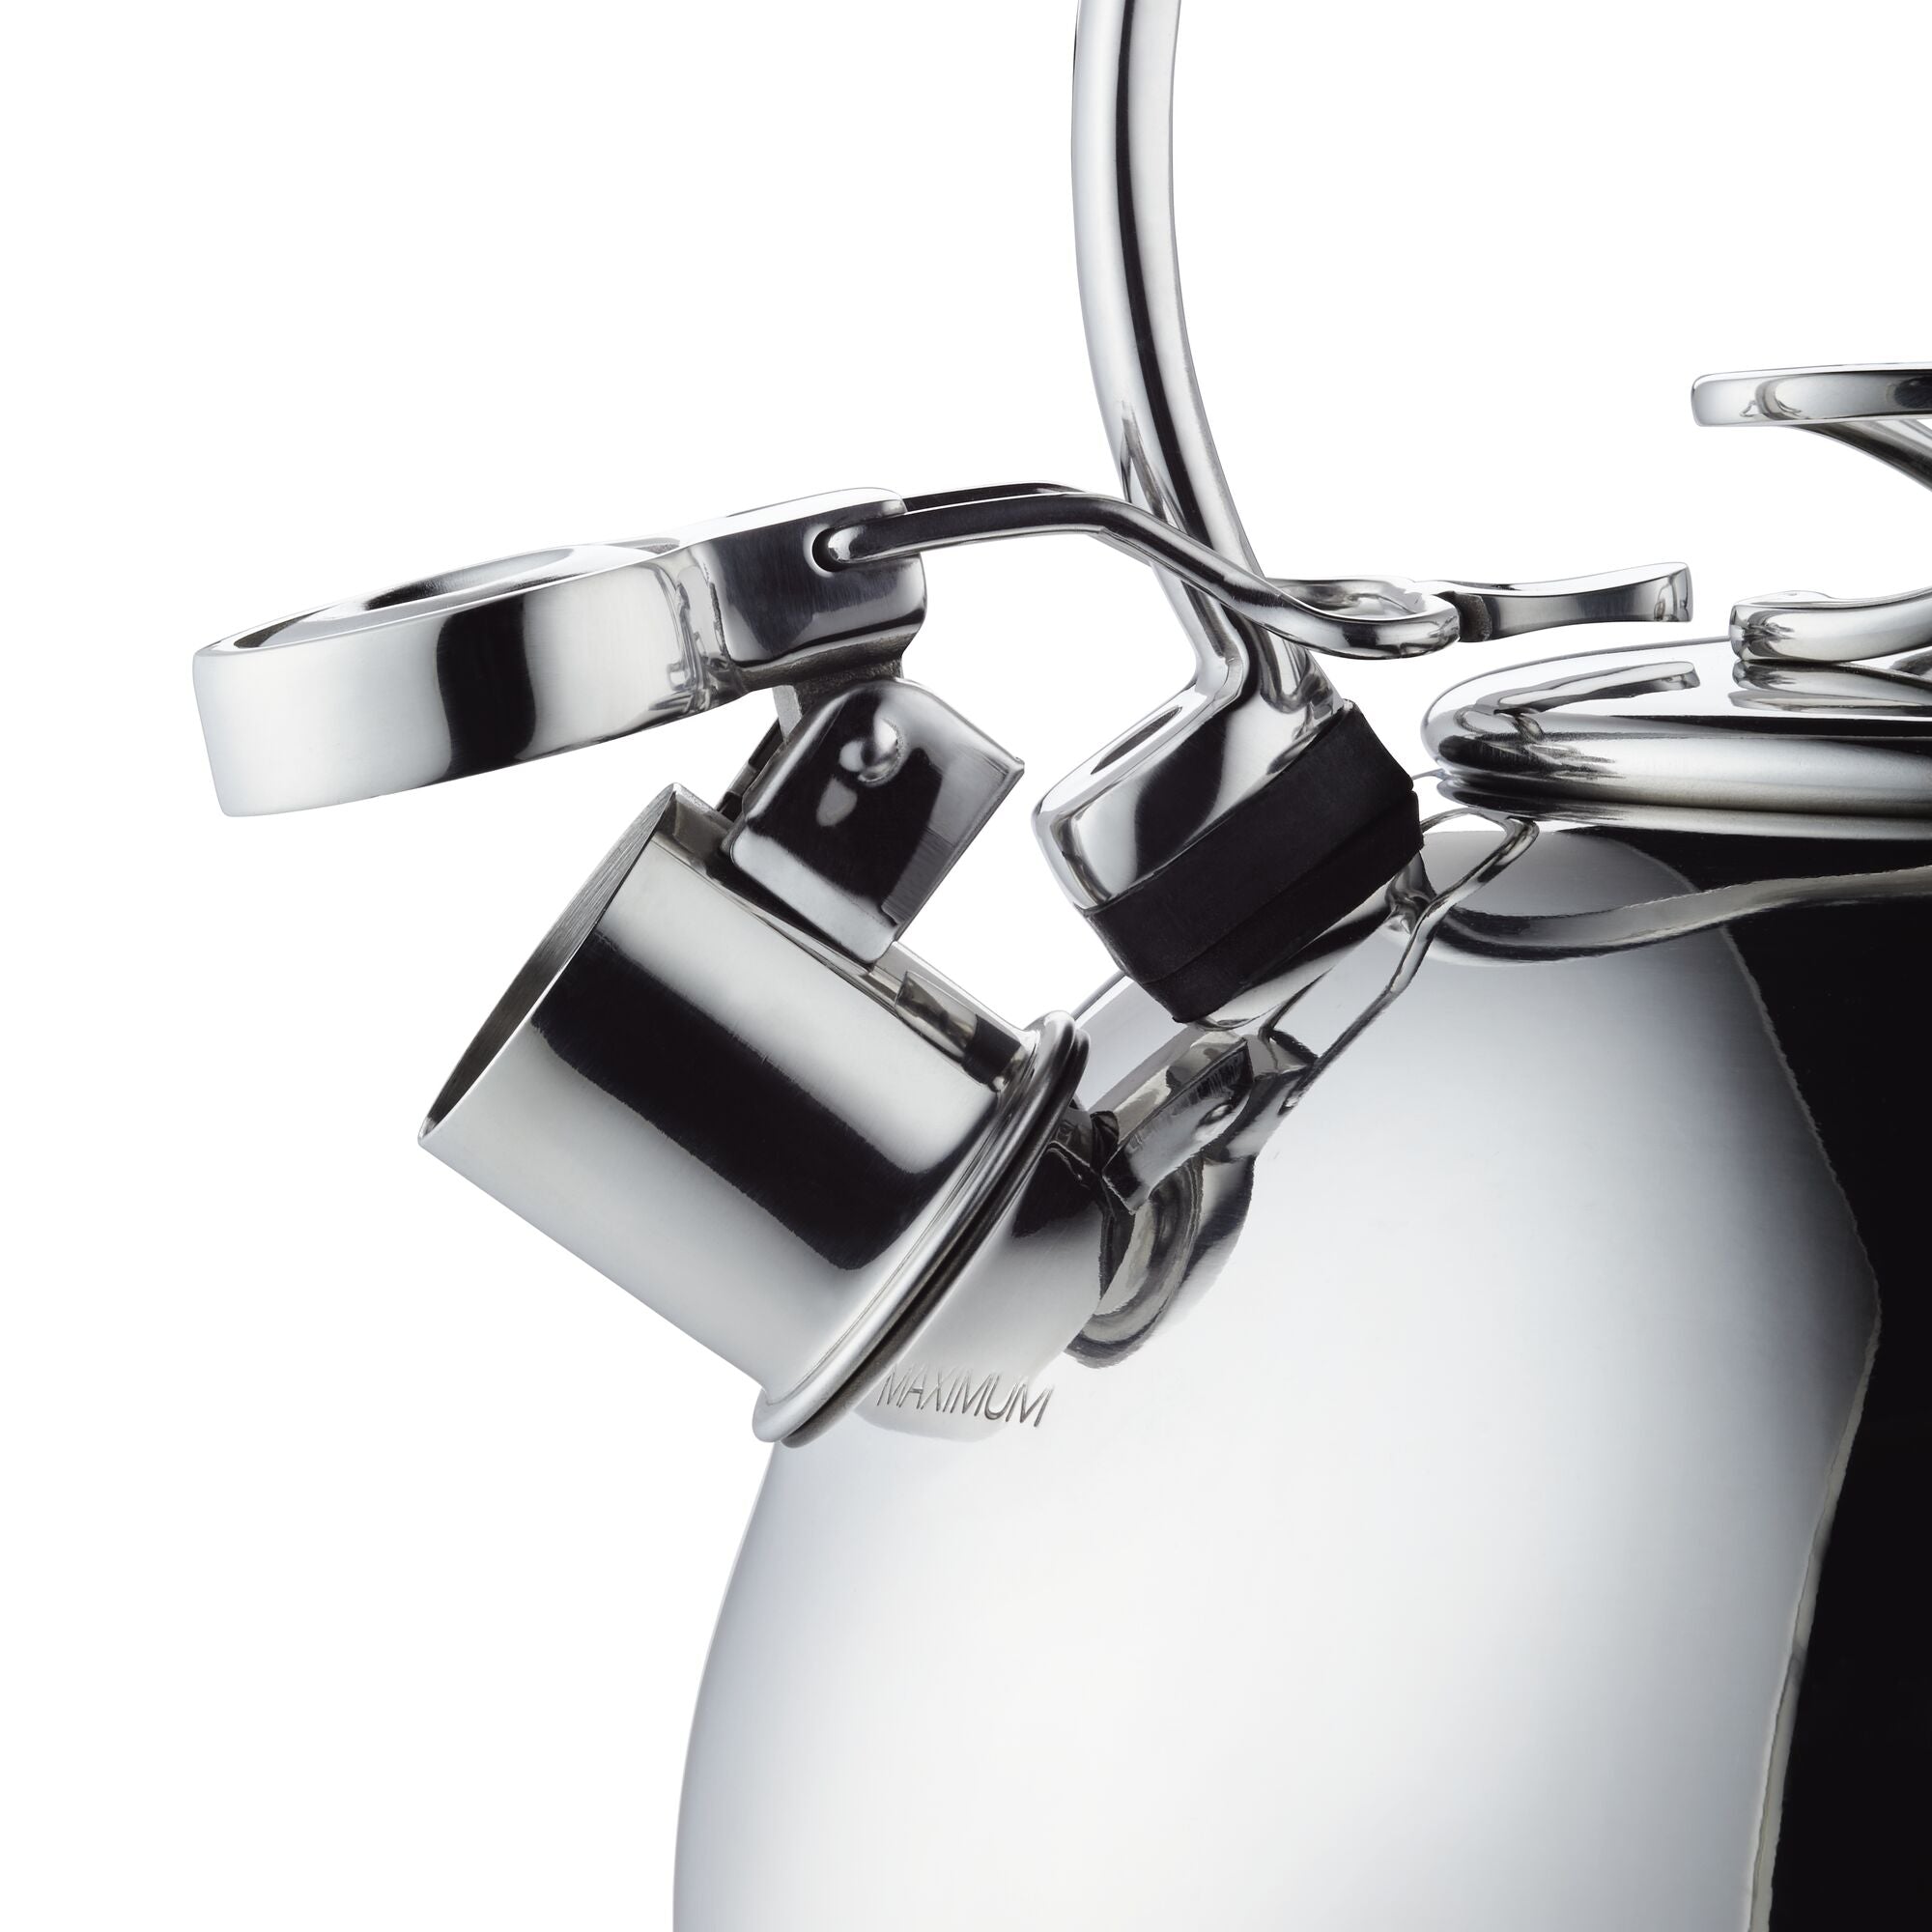 KitchenAid Stainless Steel Whistling Induction Teakettle, 1.9-Quart,  Brushed Stainless Steel